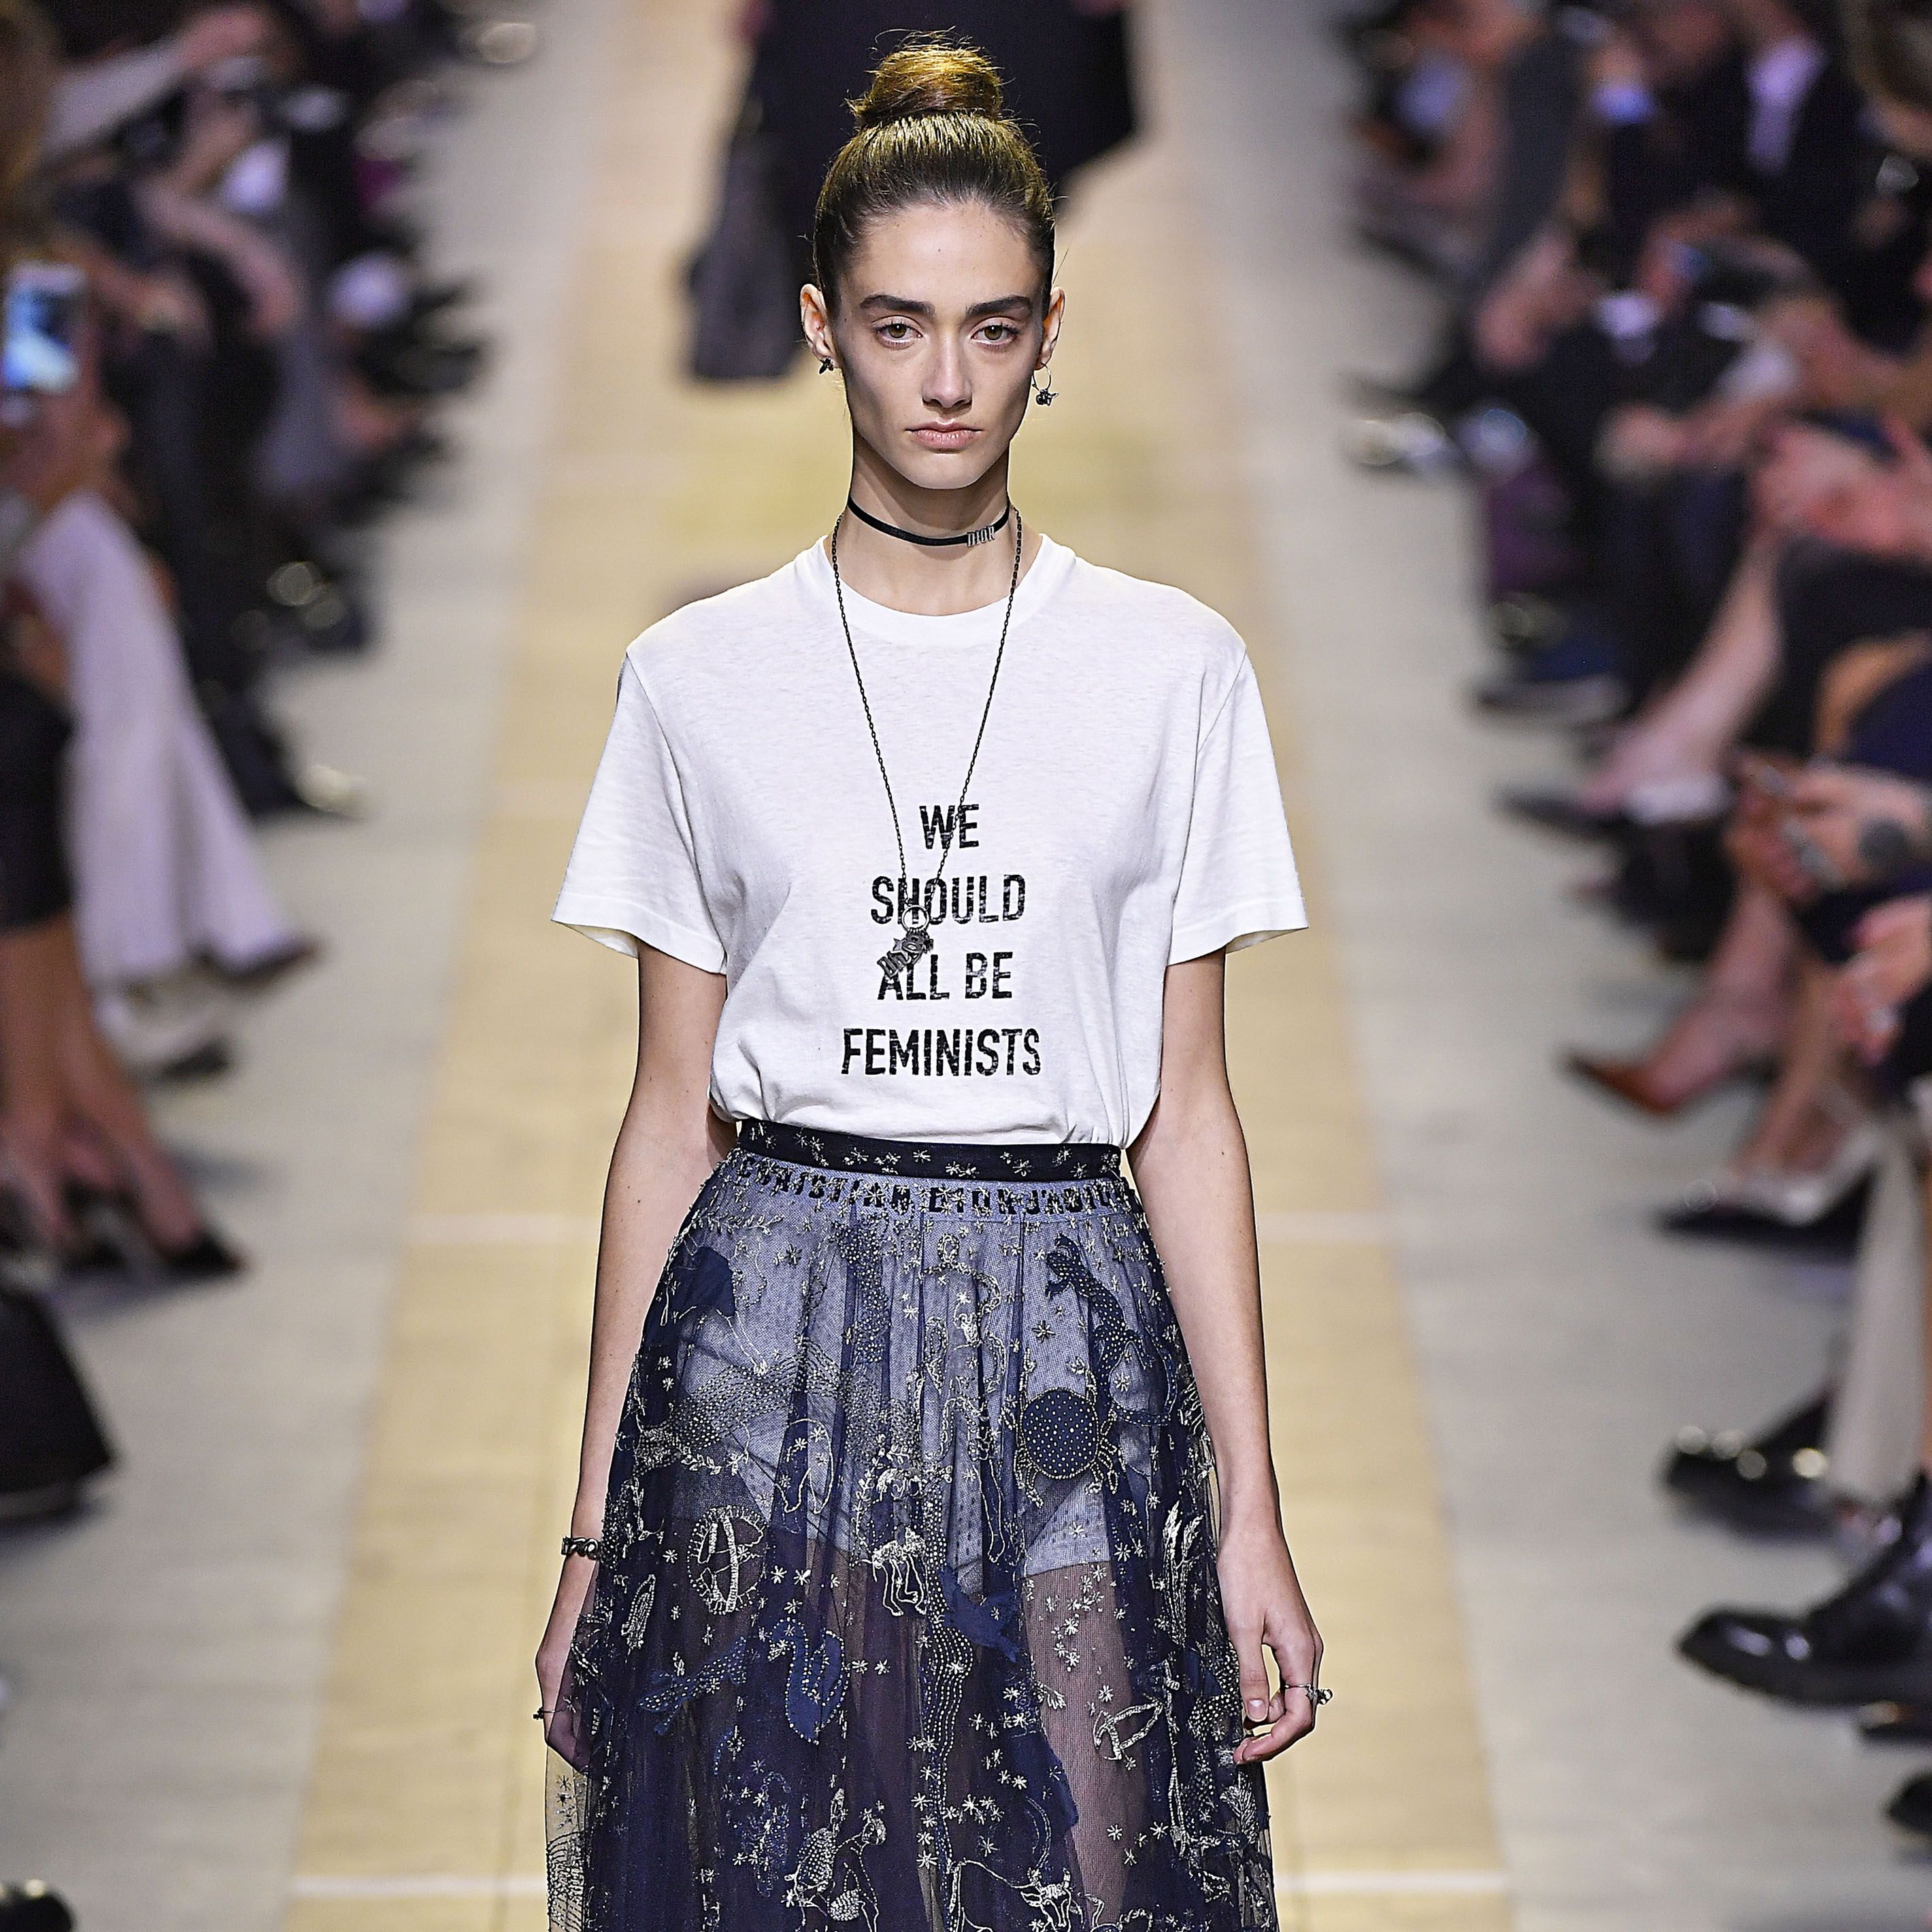 Watch the Christian Dior Show Live From Paris Here!